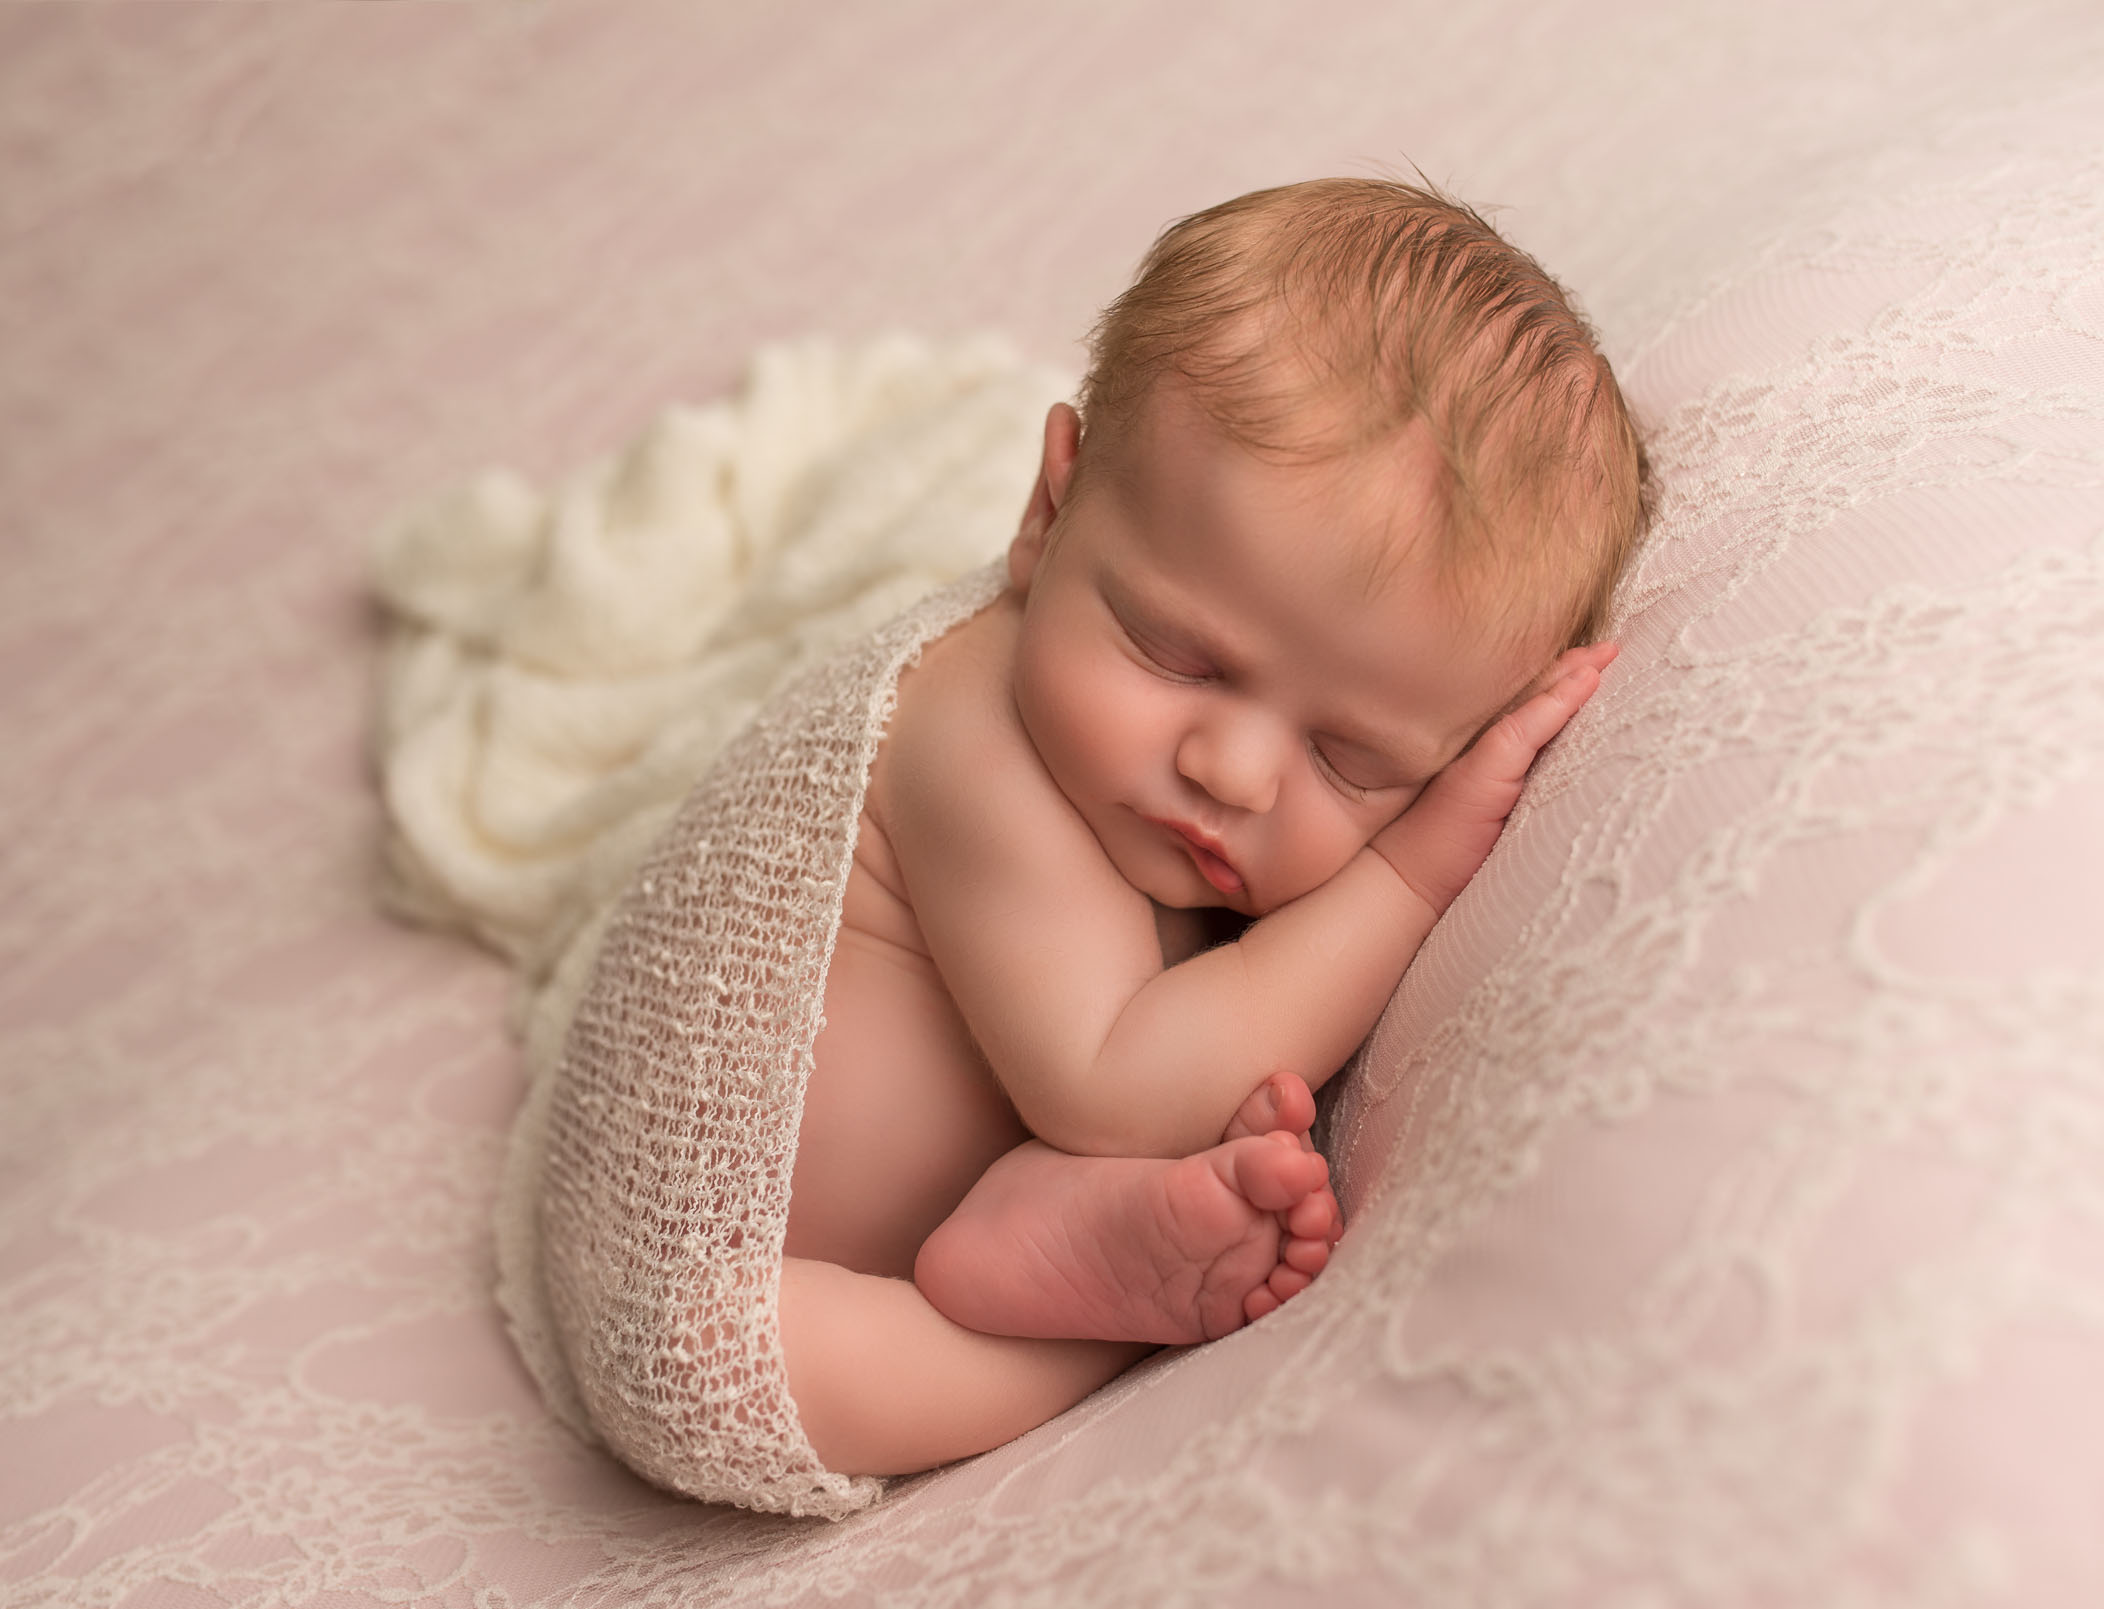 newborn in womb position with cream wrap on